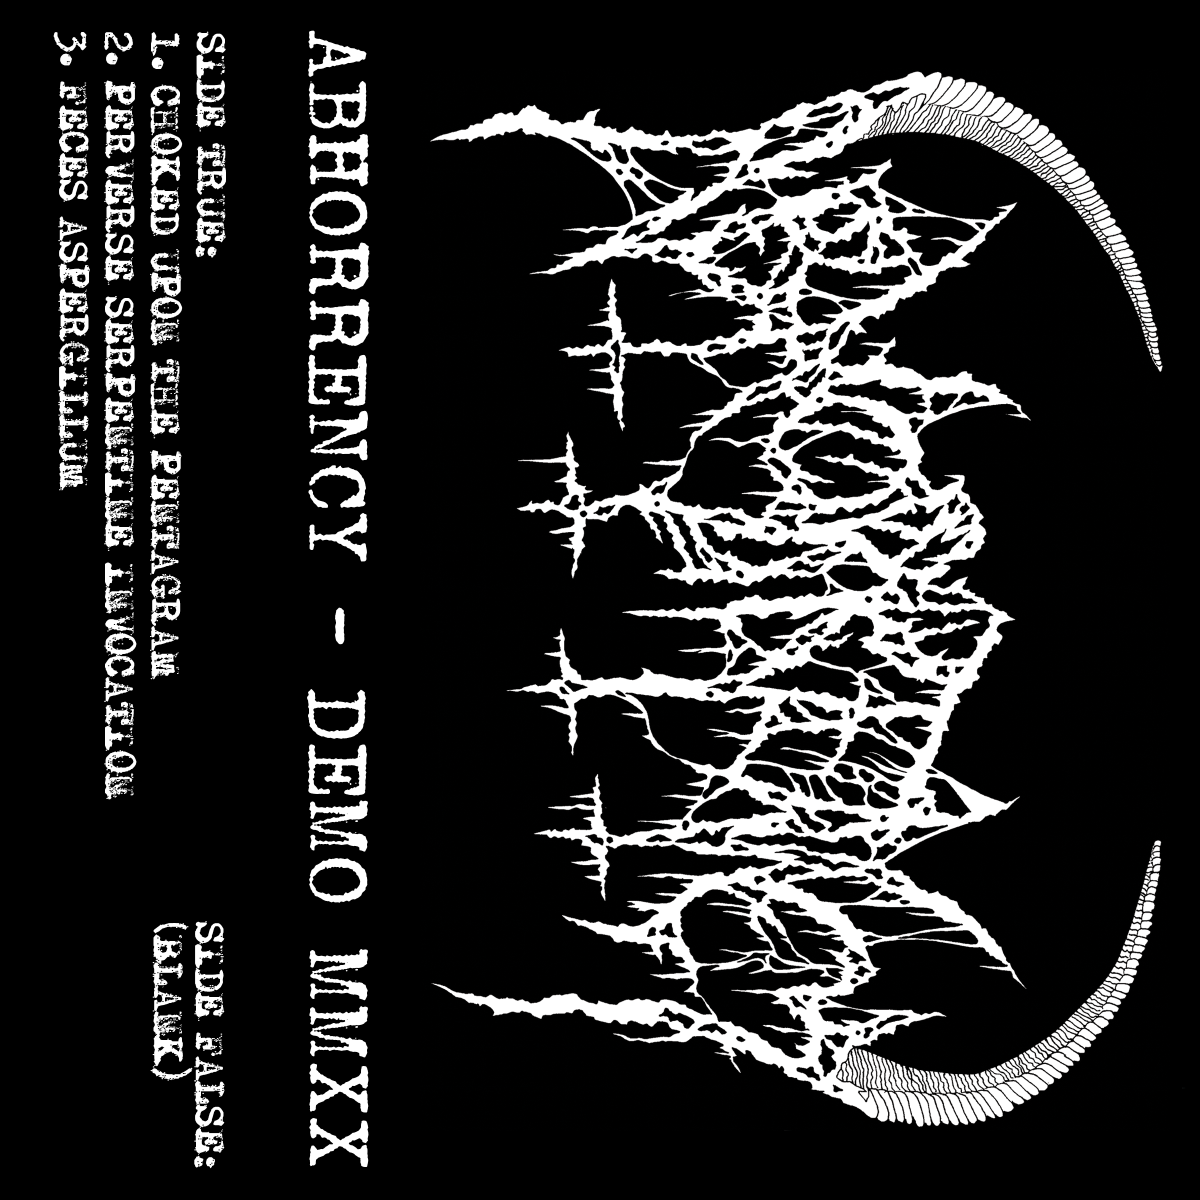 Abhorrency – Demo MMXX (self-released, 2020)